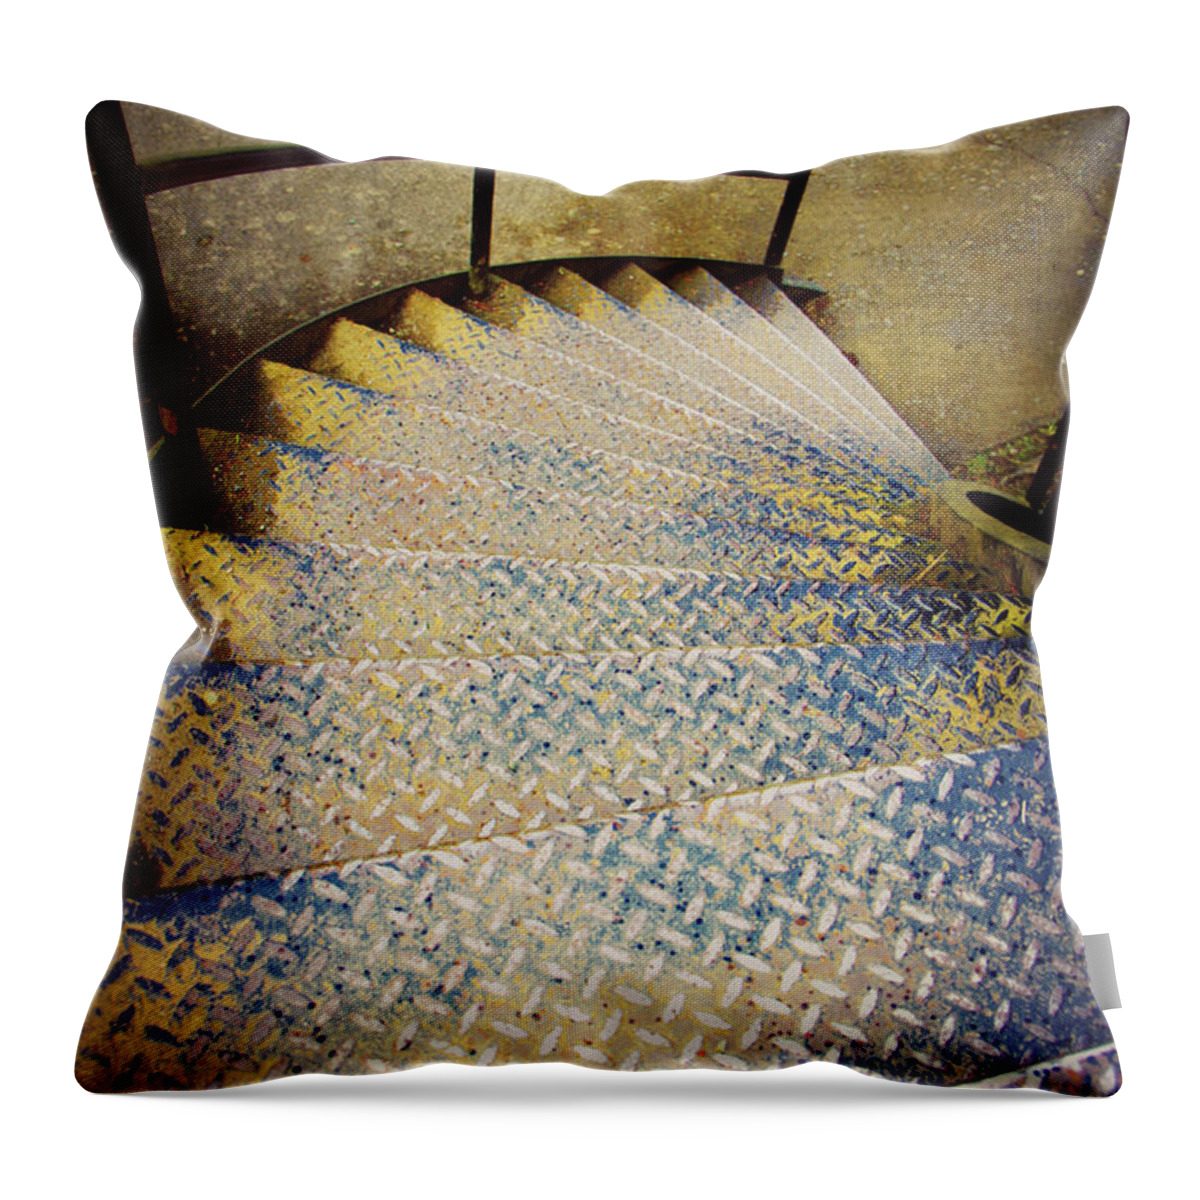 Stairs Throw Pillow featuring the photograph Spiral Stairs by Marilyn Wilson